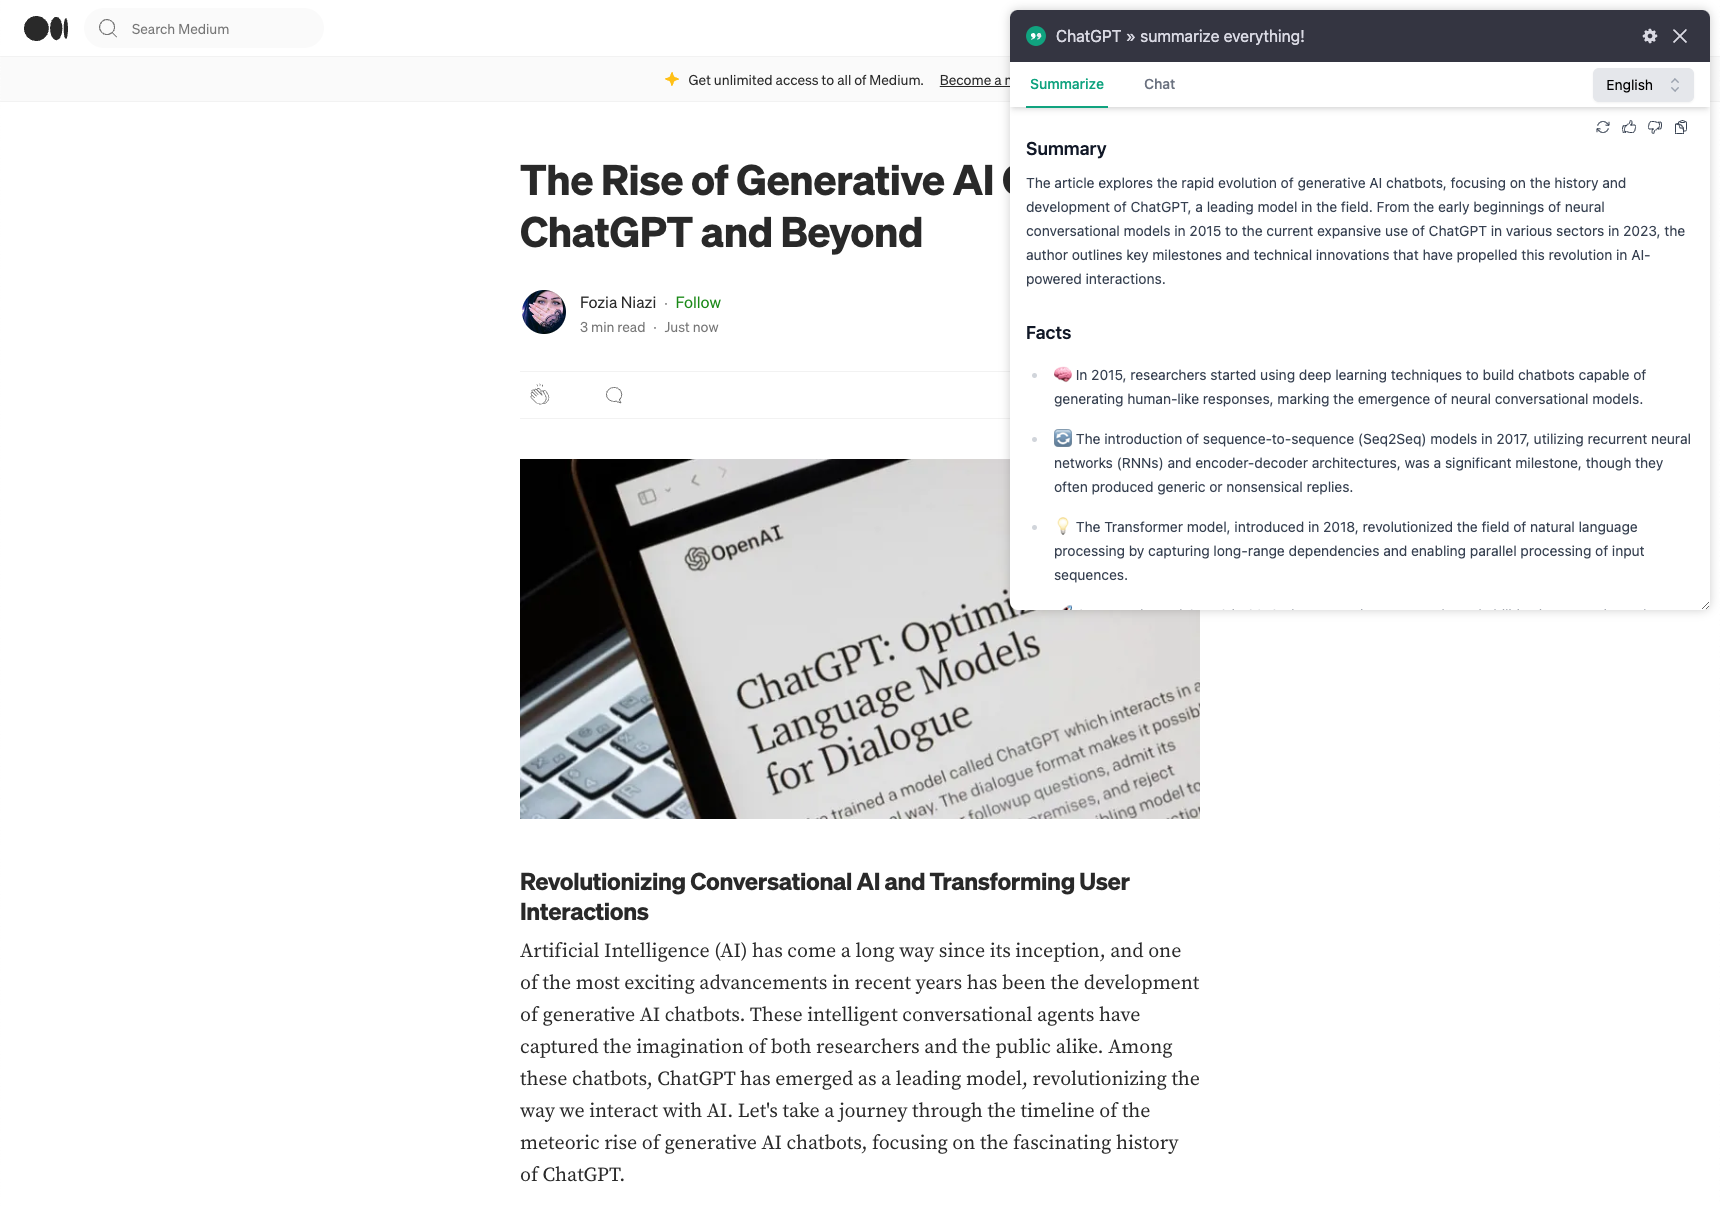 how to use chatgpt to summarize content